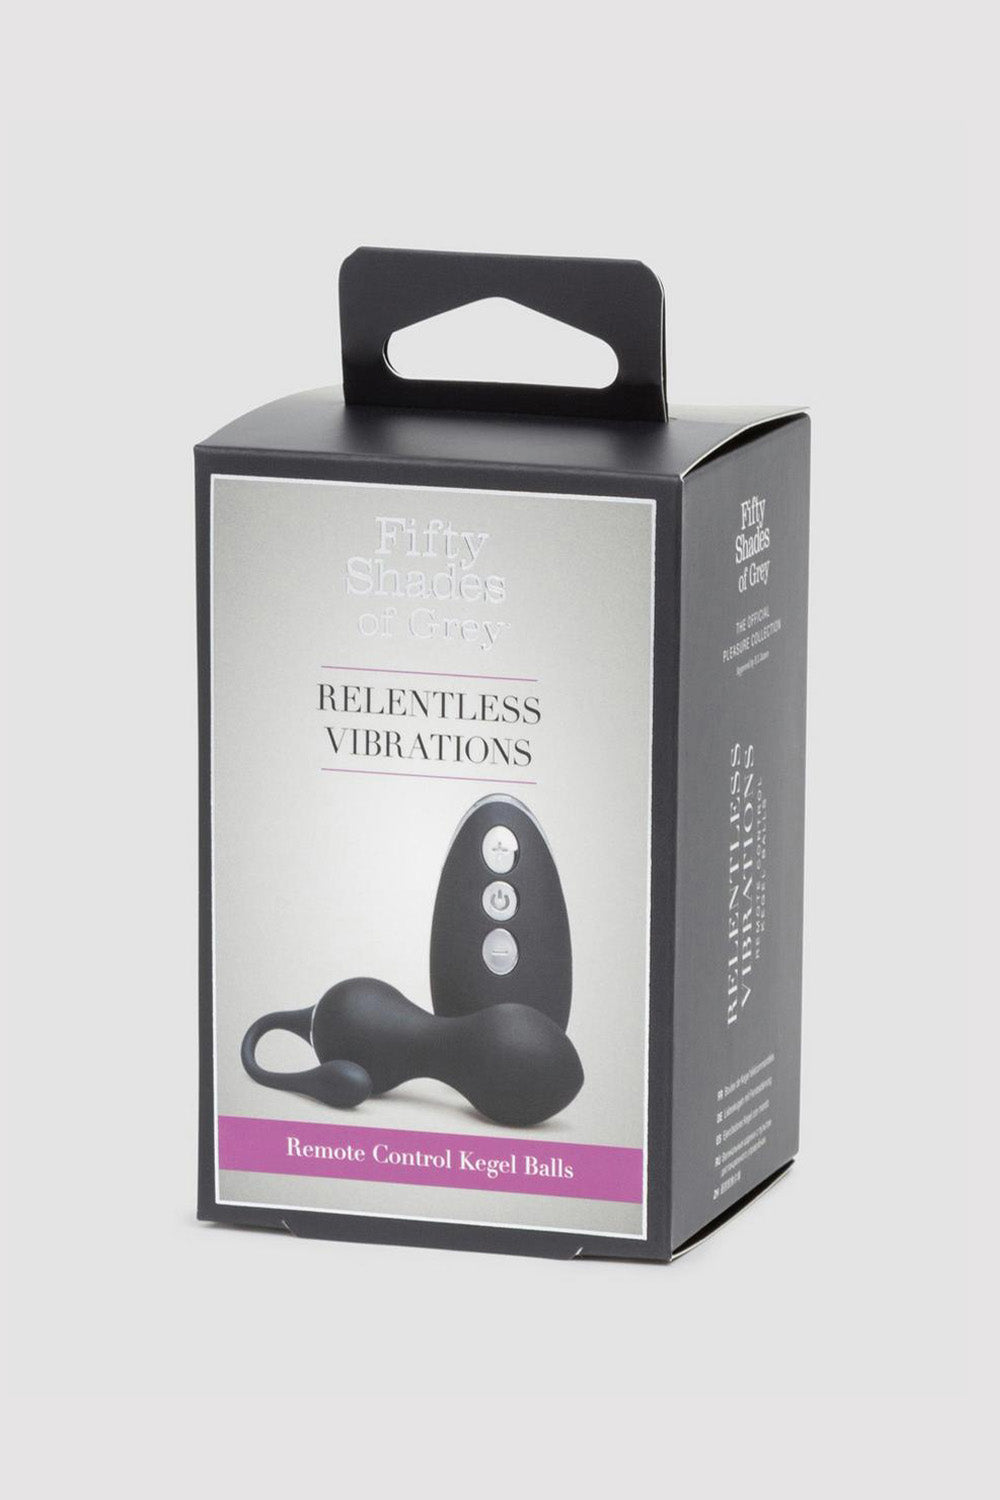 Fifty Shades of Grey Relentless Vibrations Remote Control Kegel Balls